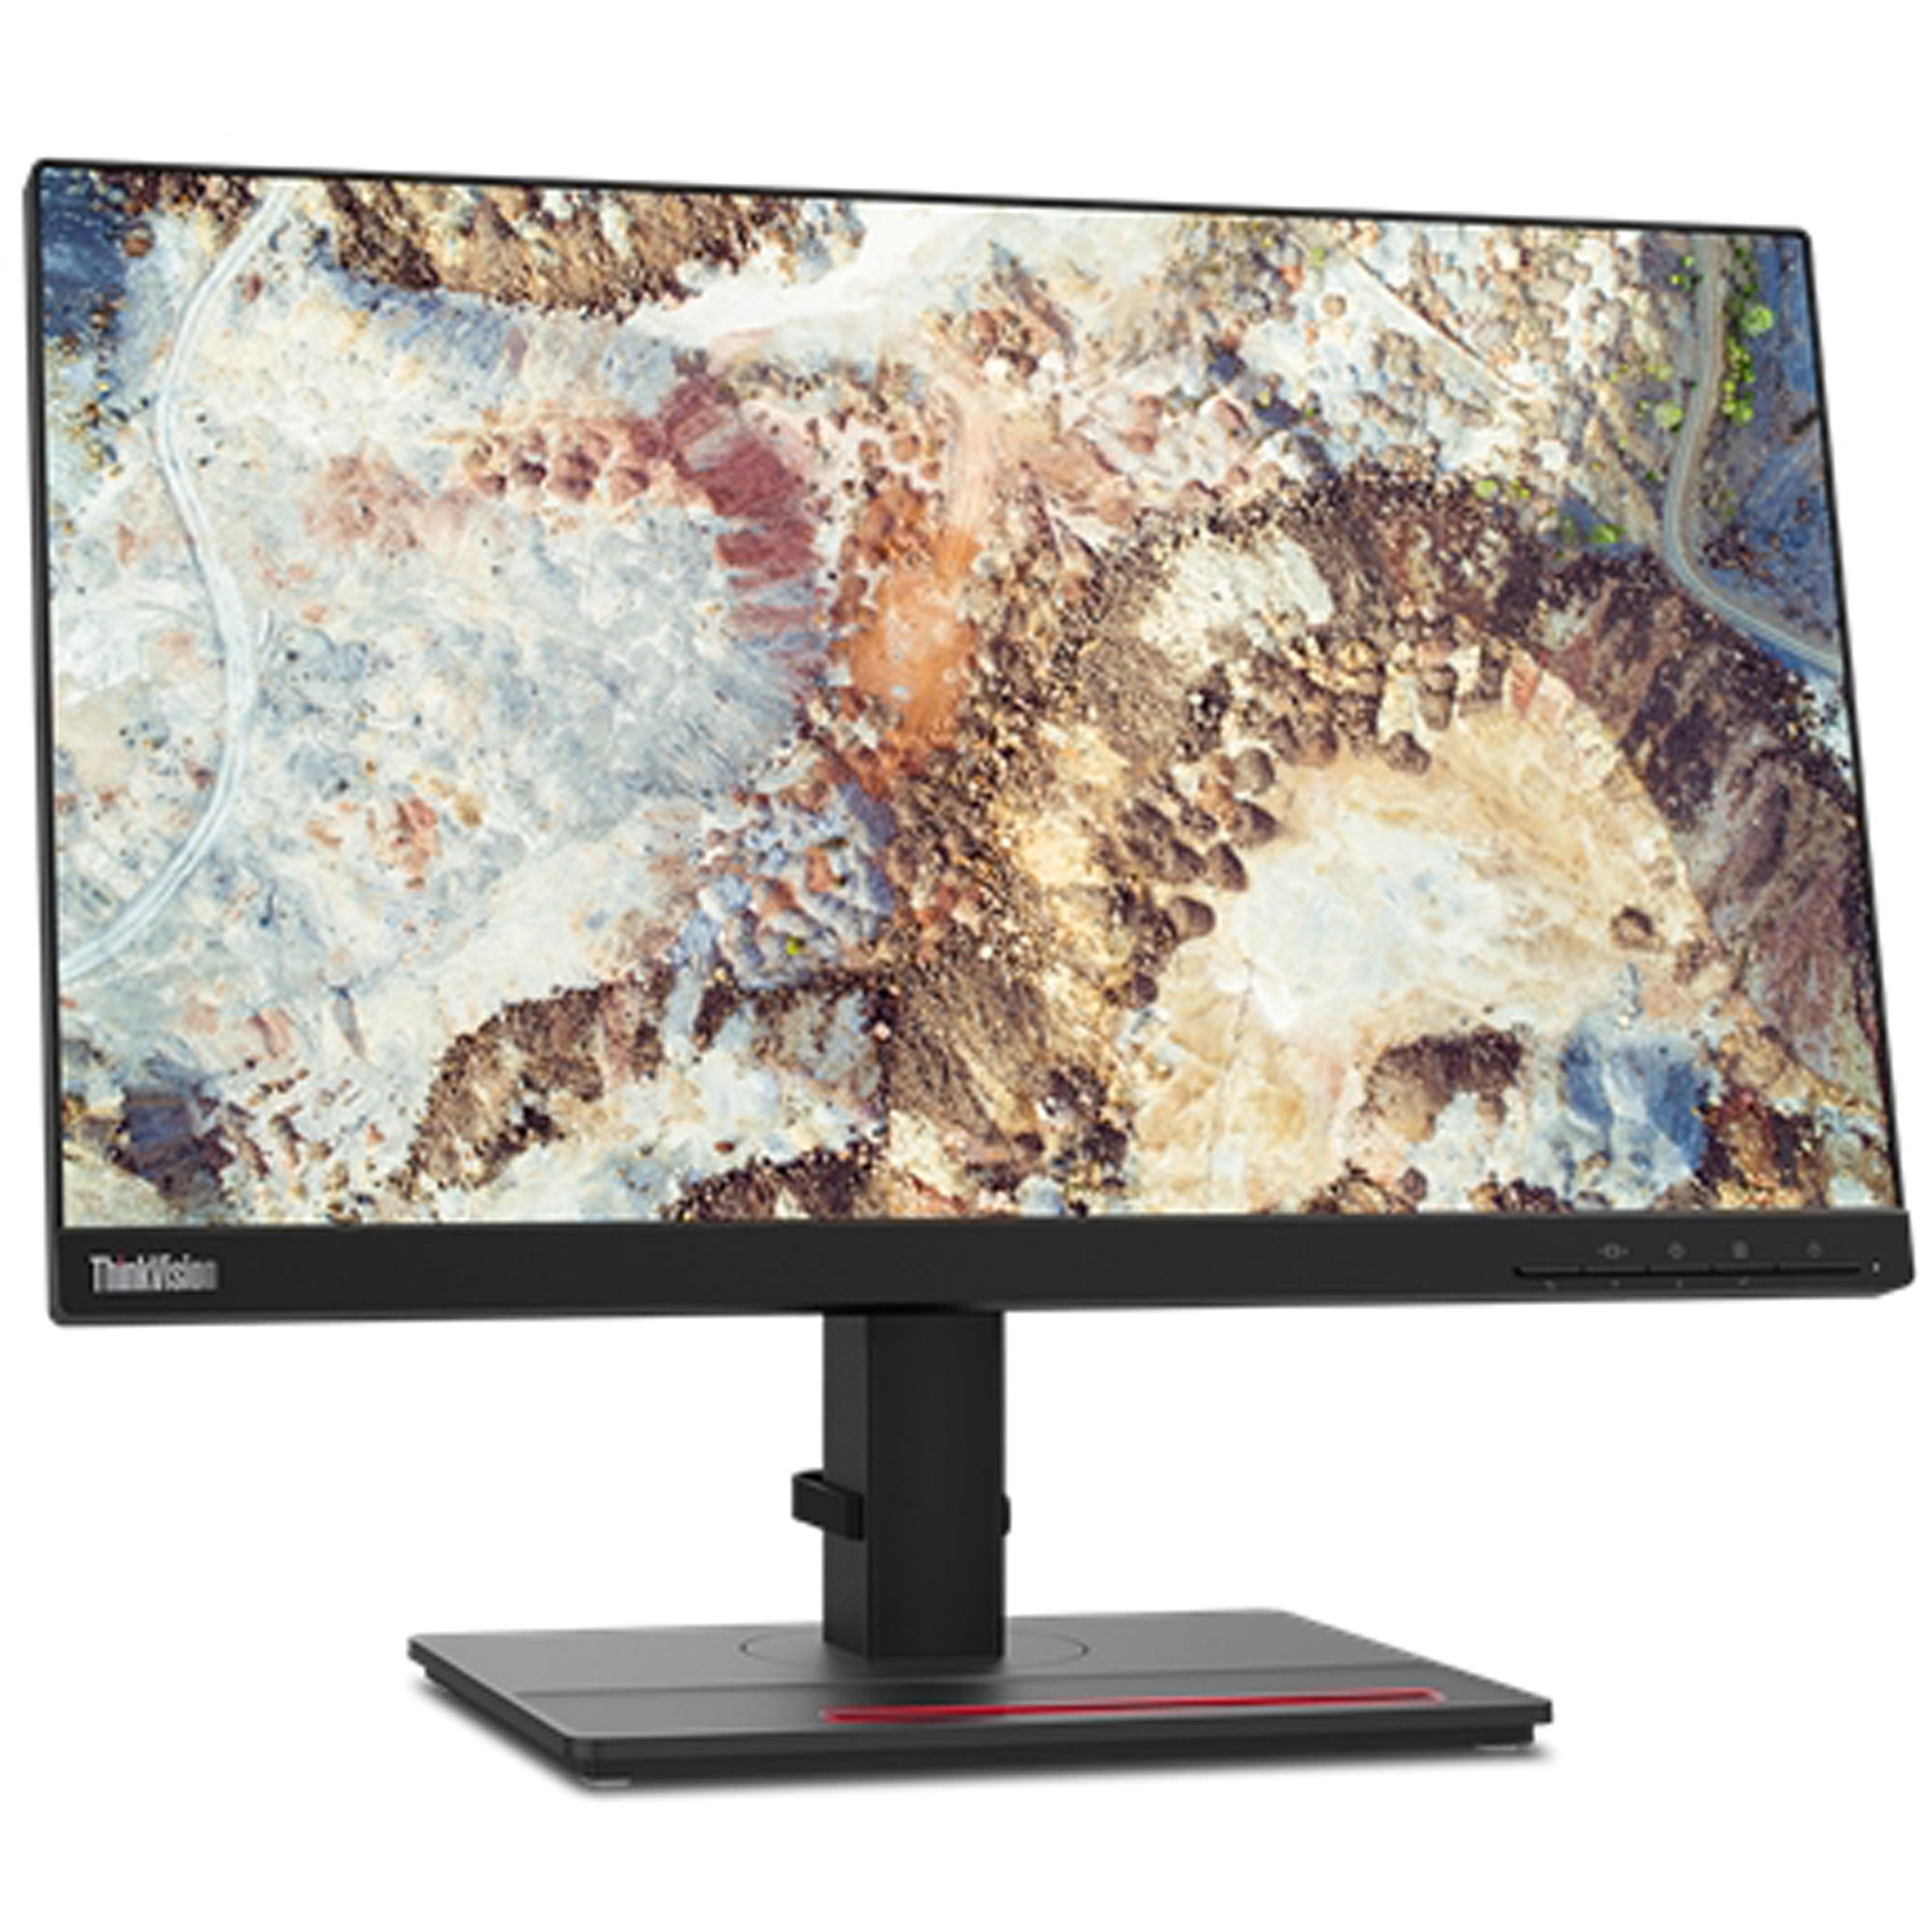 Lenovo ThinkVision P27h-20 27-inch 16:9 QHD Monitor with USB Type 